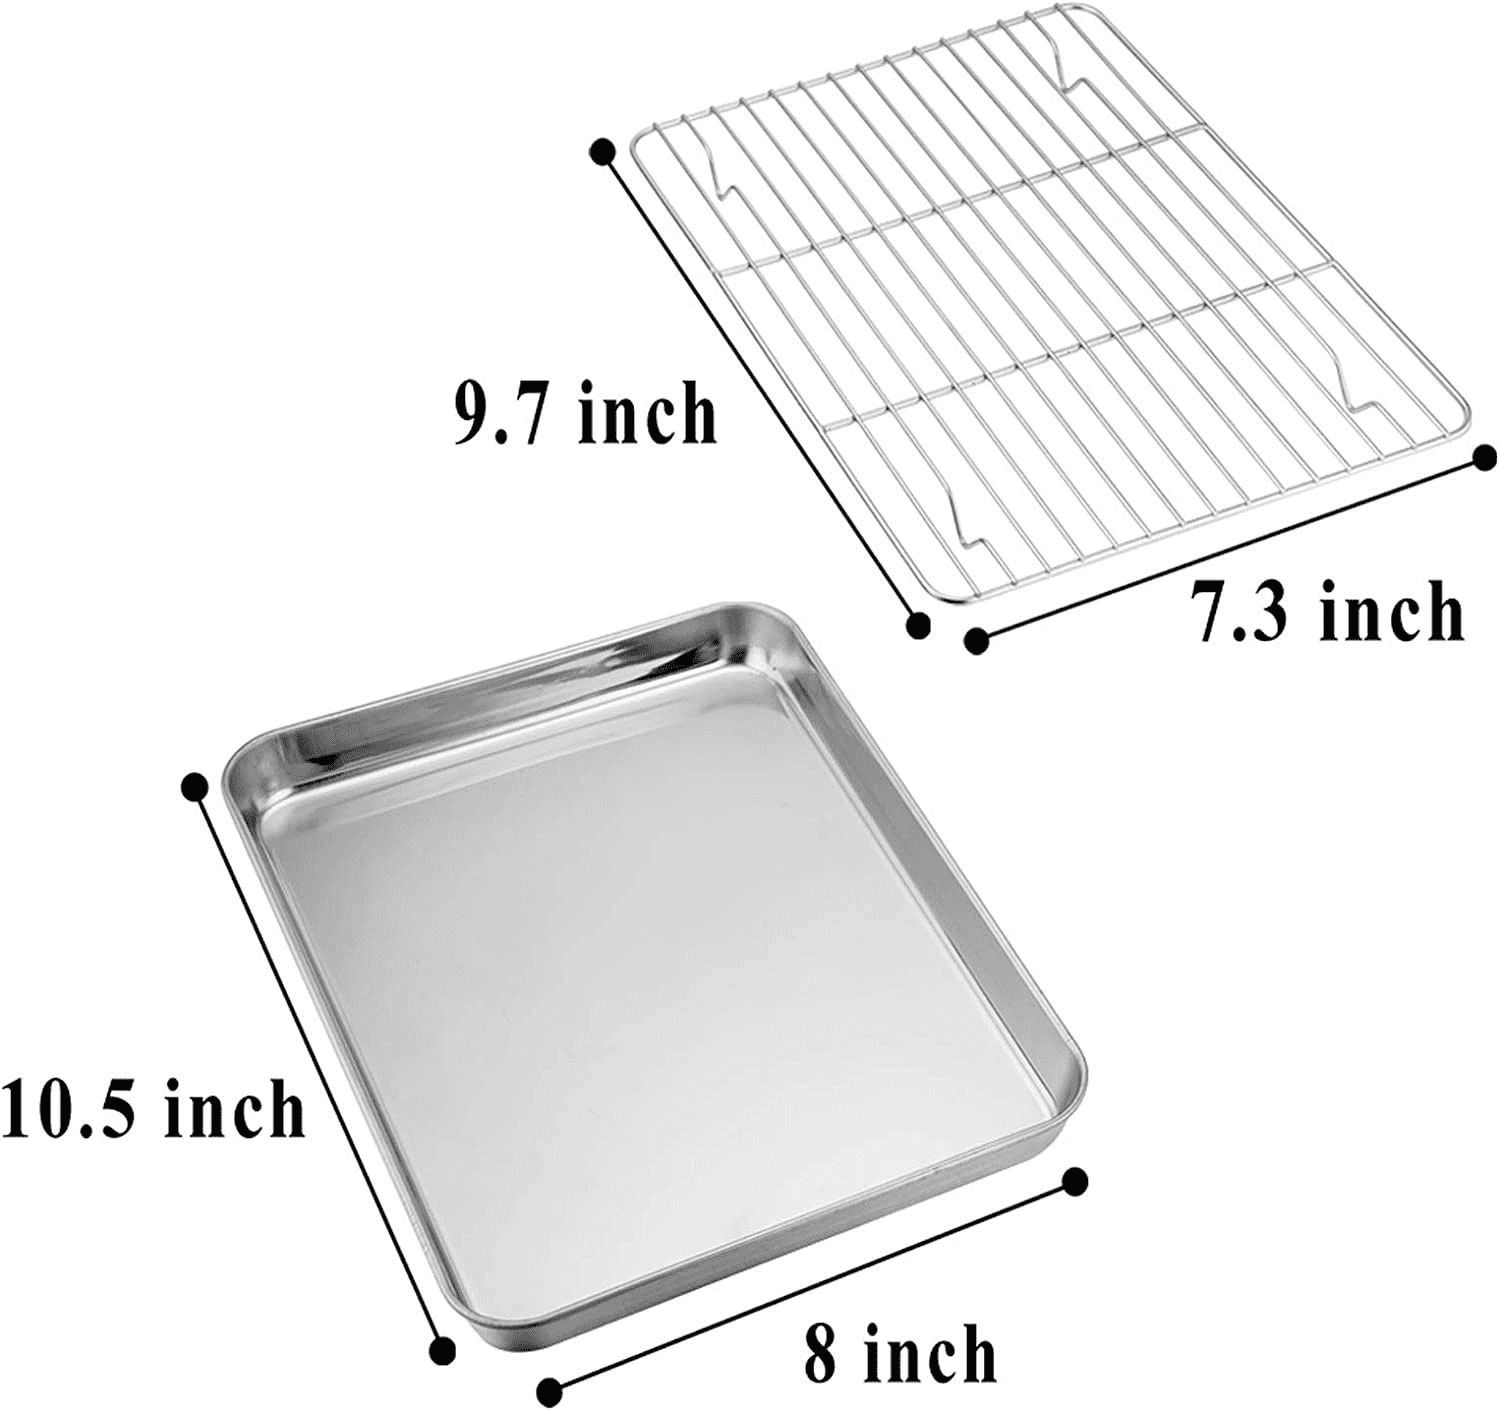 Small Baking Sheet Stainless Steel Cookie Sheet Mini Toaster Oven Tray Pan, Rectangle Size 10.4 x 8 x 1 inch, Non Toxic & Healthy,Superior Mirror